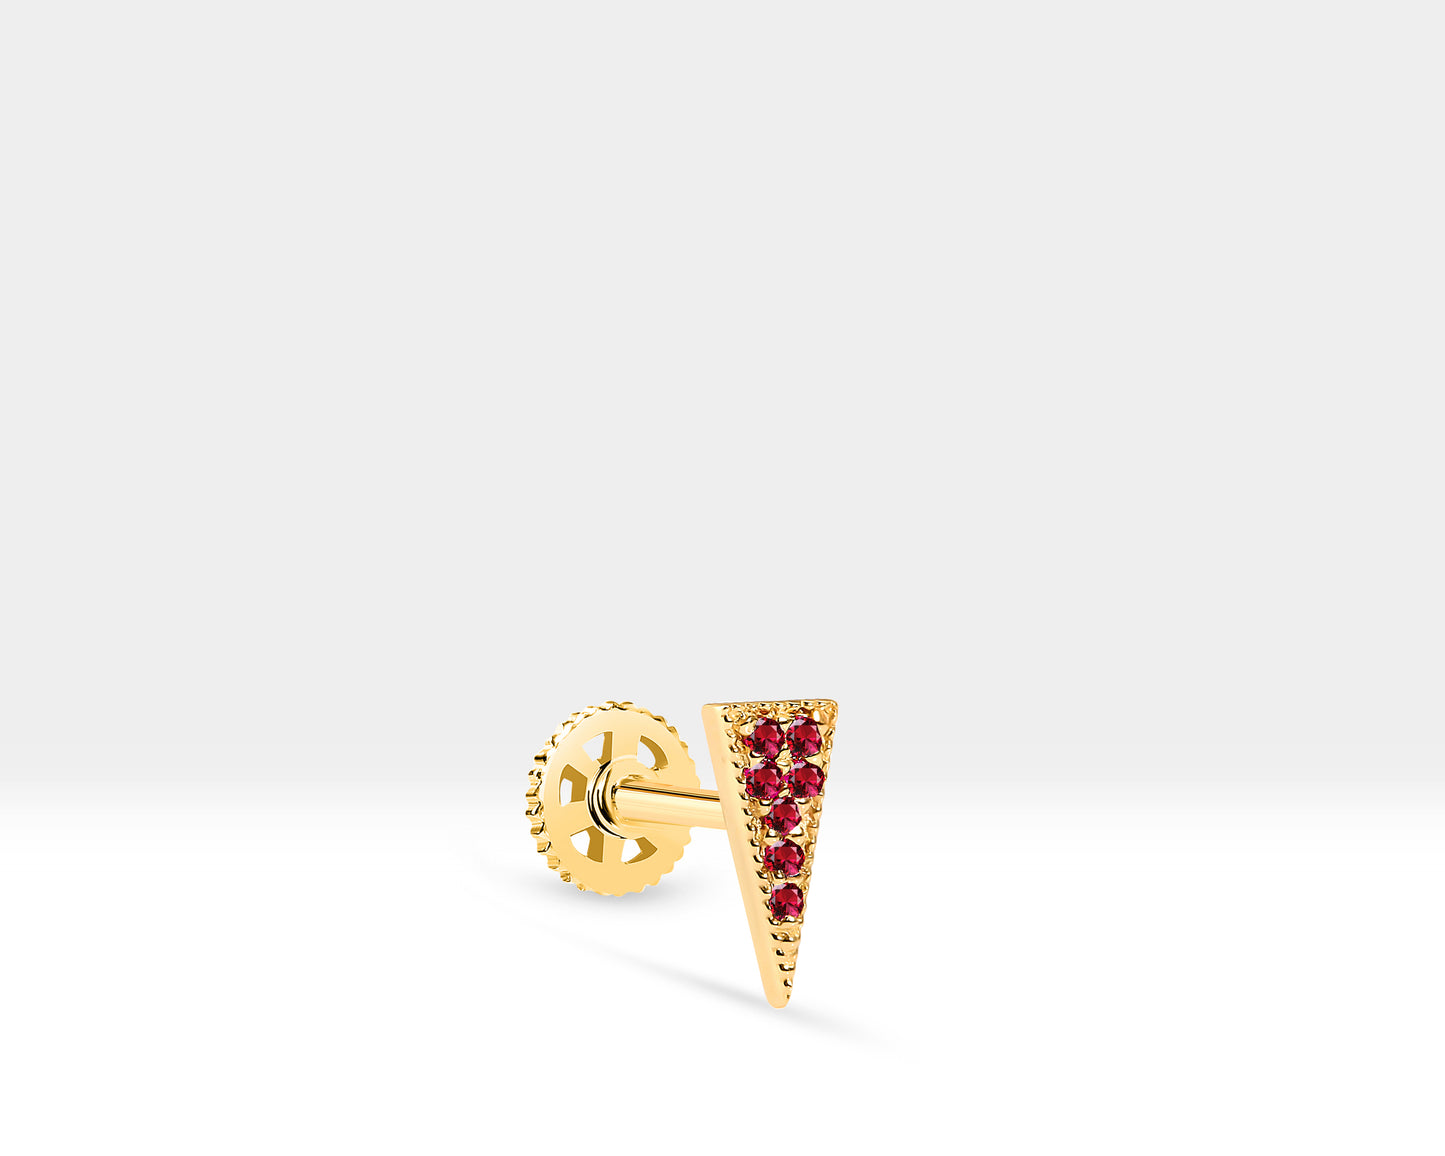 Tragus Piercing,Pave Setting Ruby Piercing,Triangle Design Piercing,14K Yellow Solid Gold